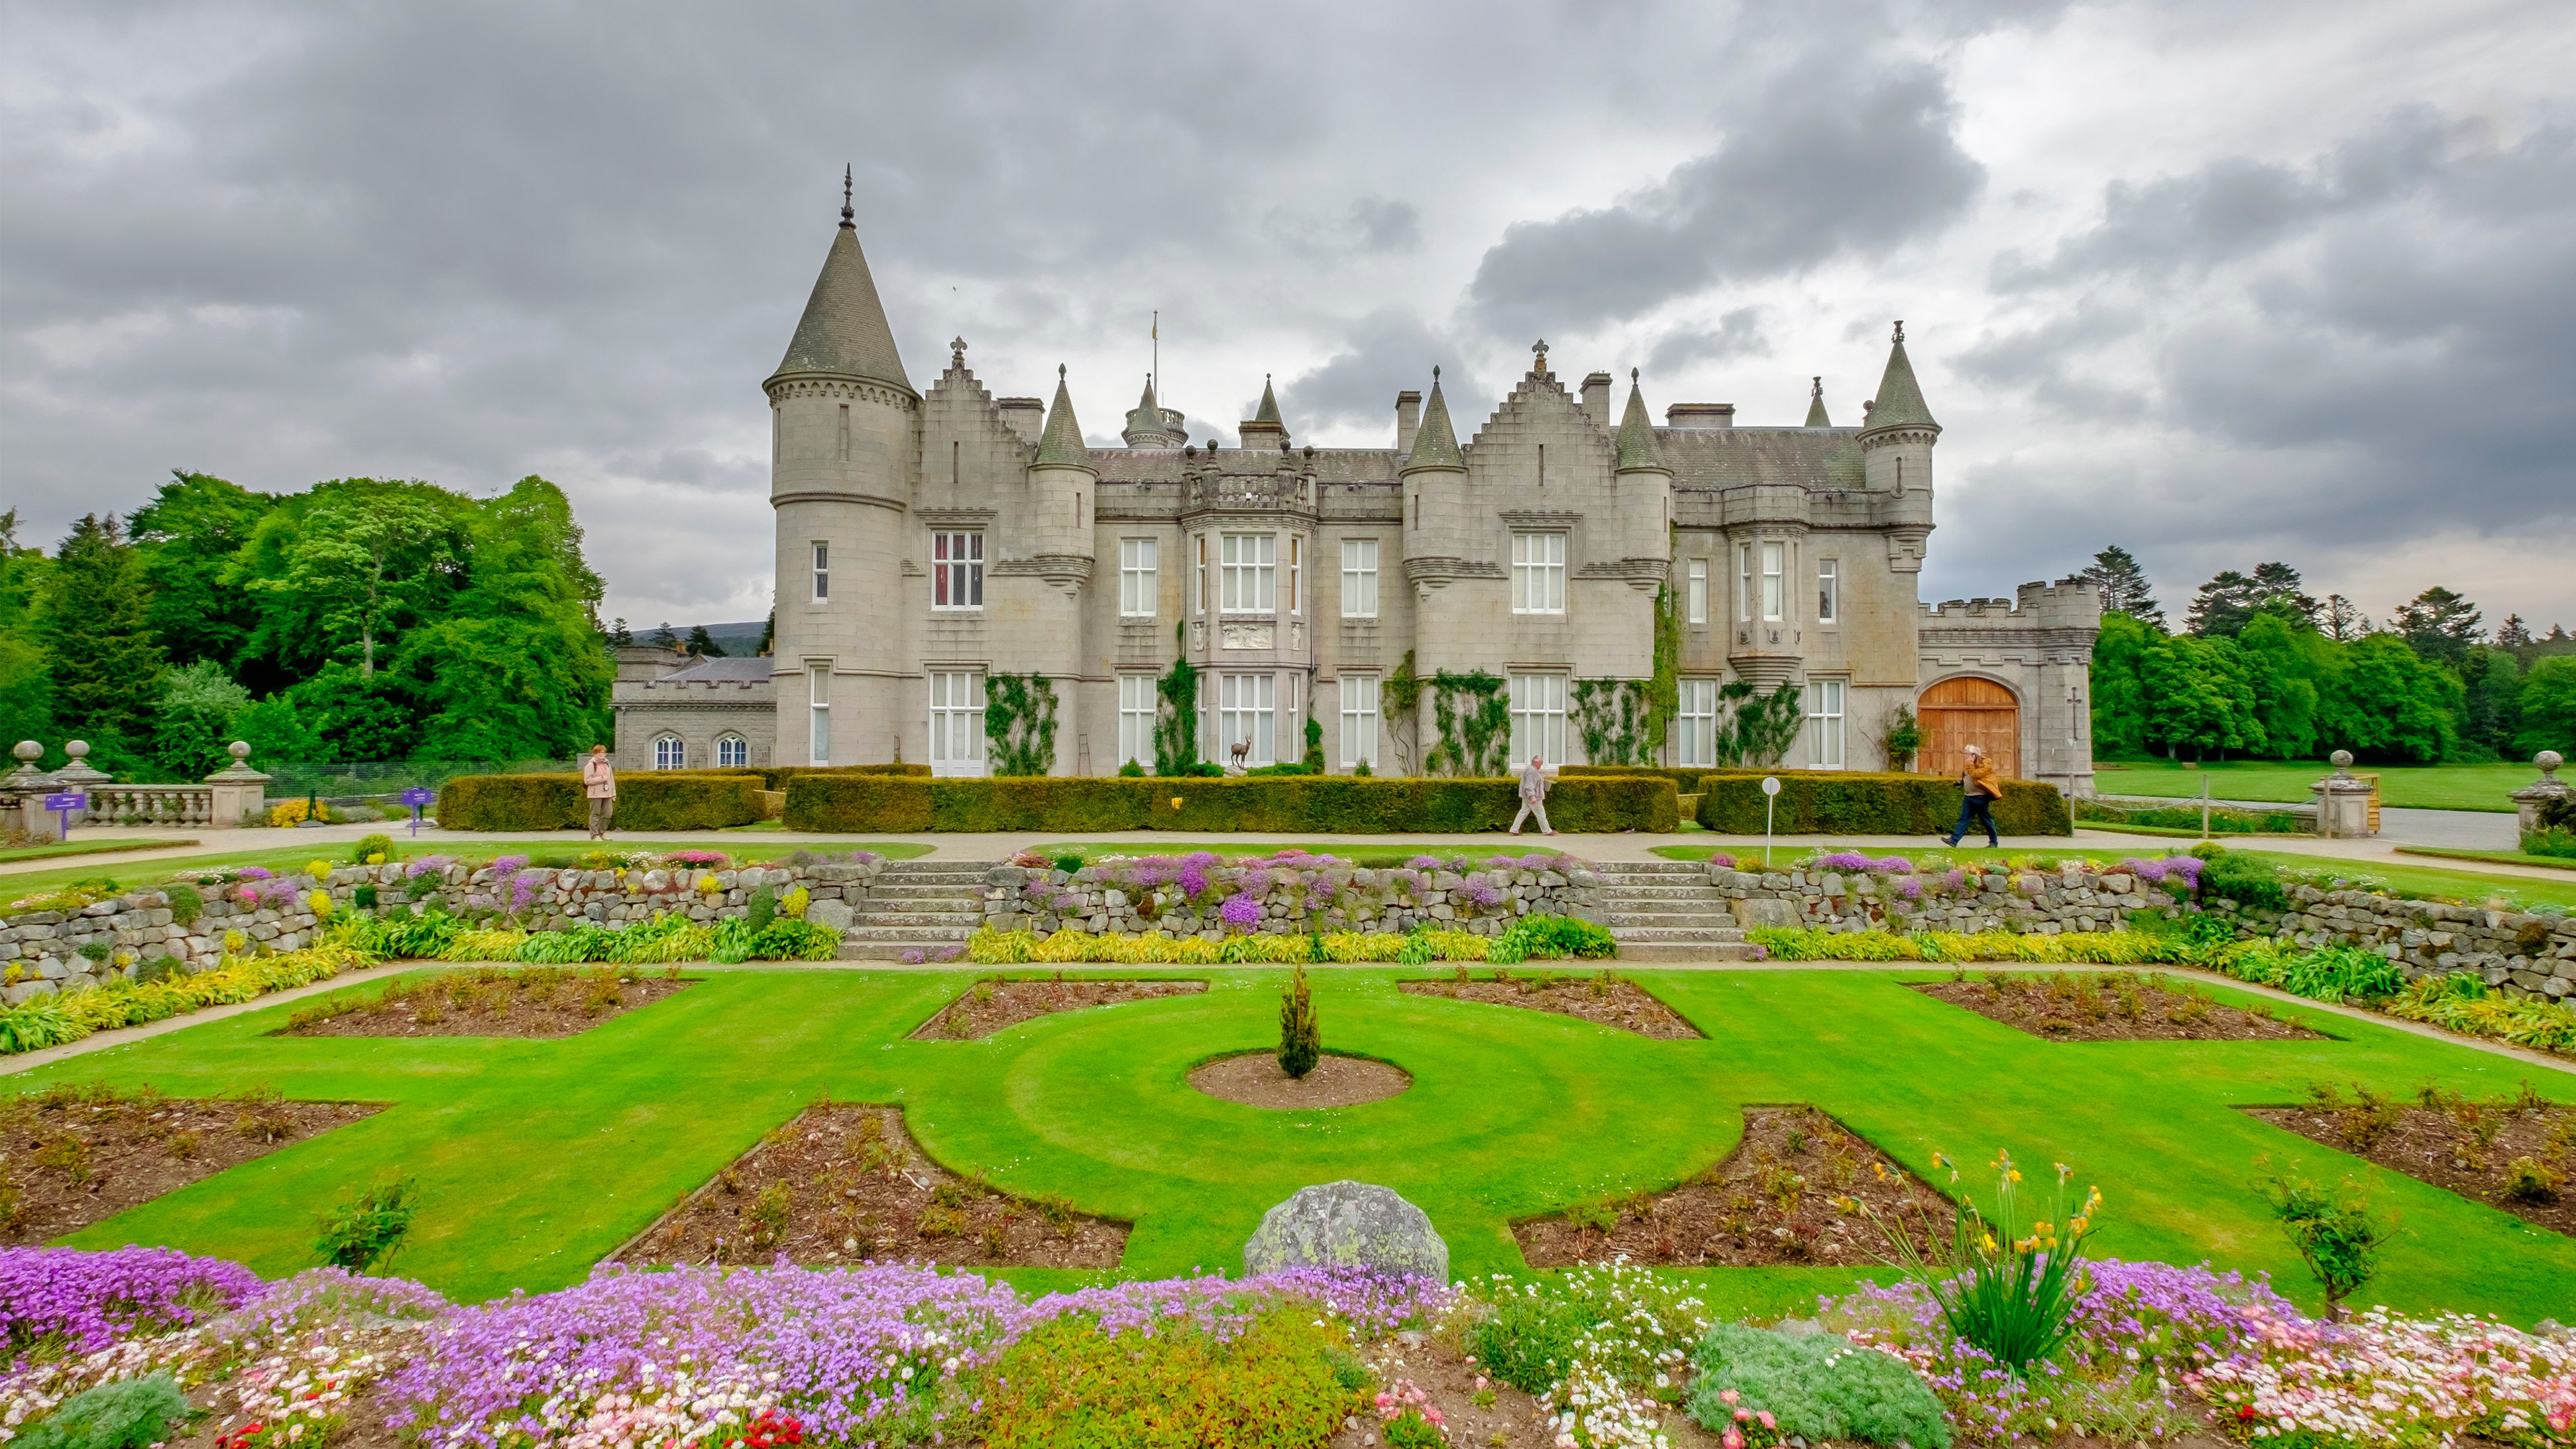 A History of Balmoral Castle Where Queen Elizabeth II Spent Her